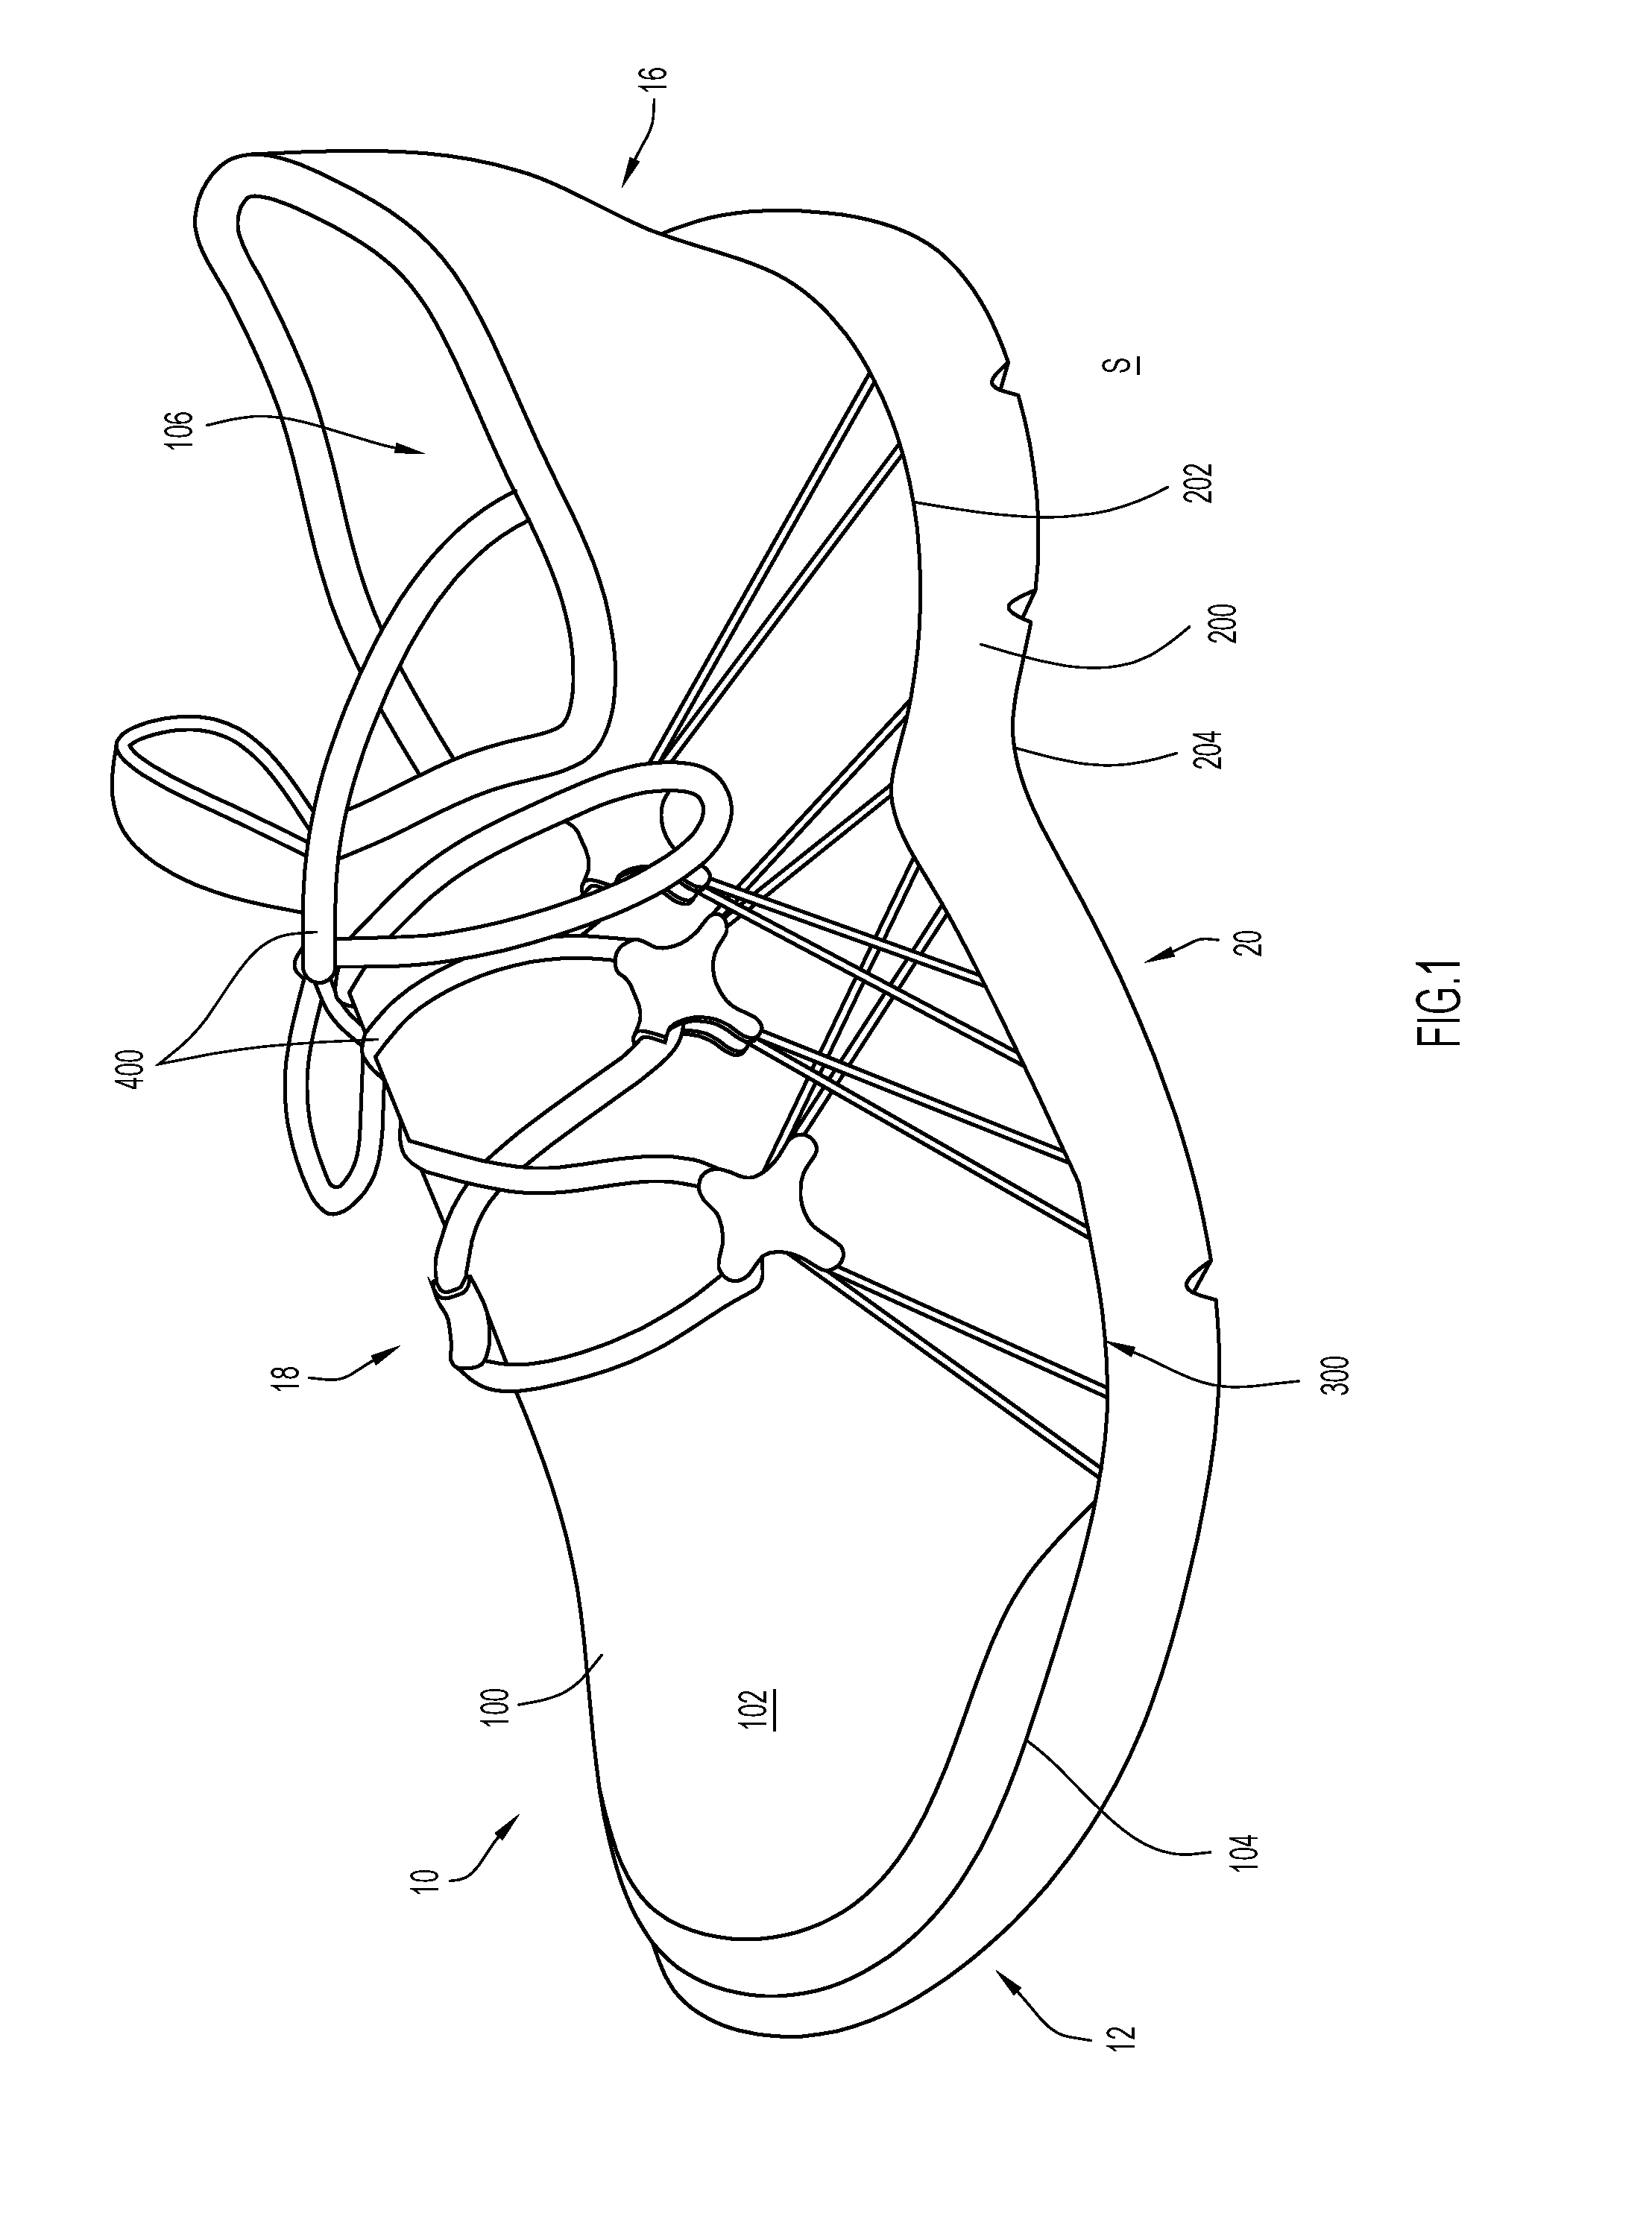 Article of footwear with dynamic tensioning system